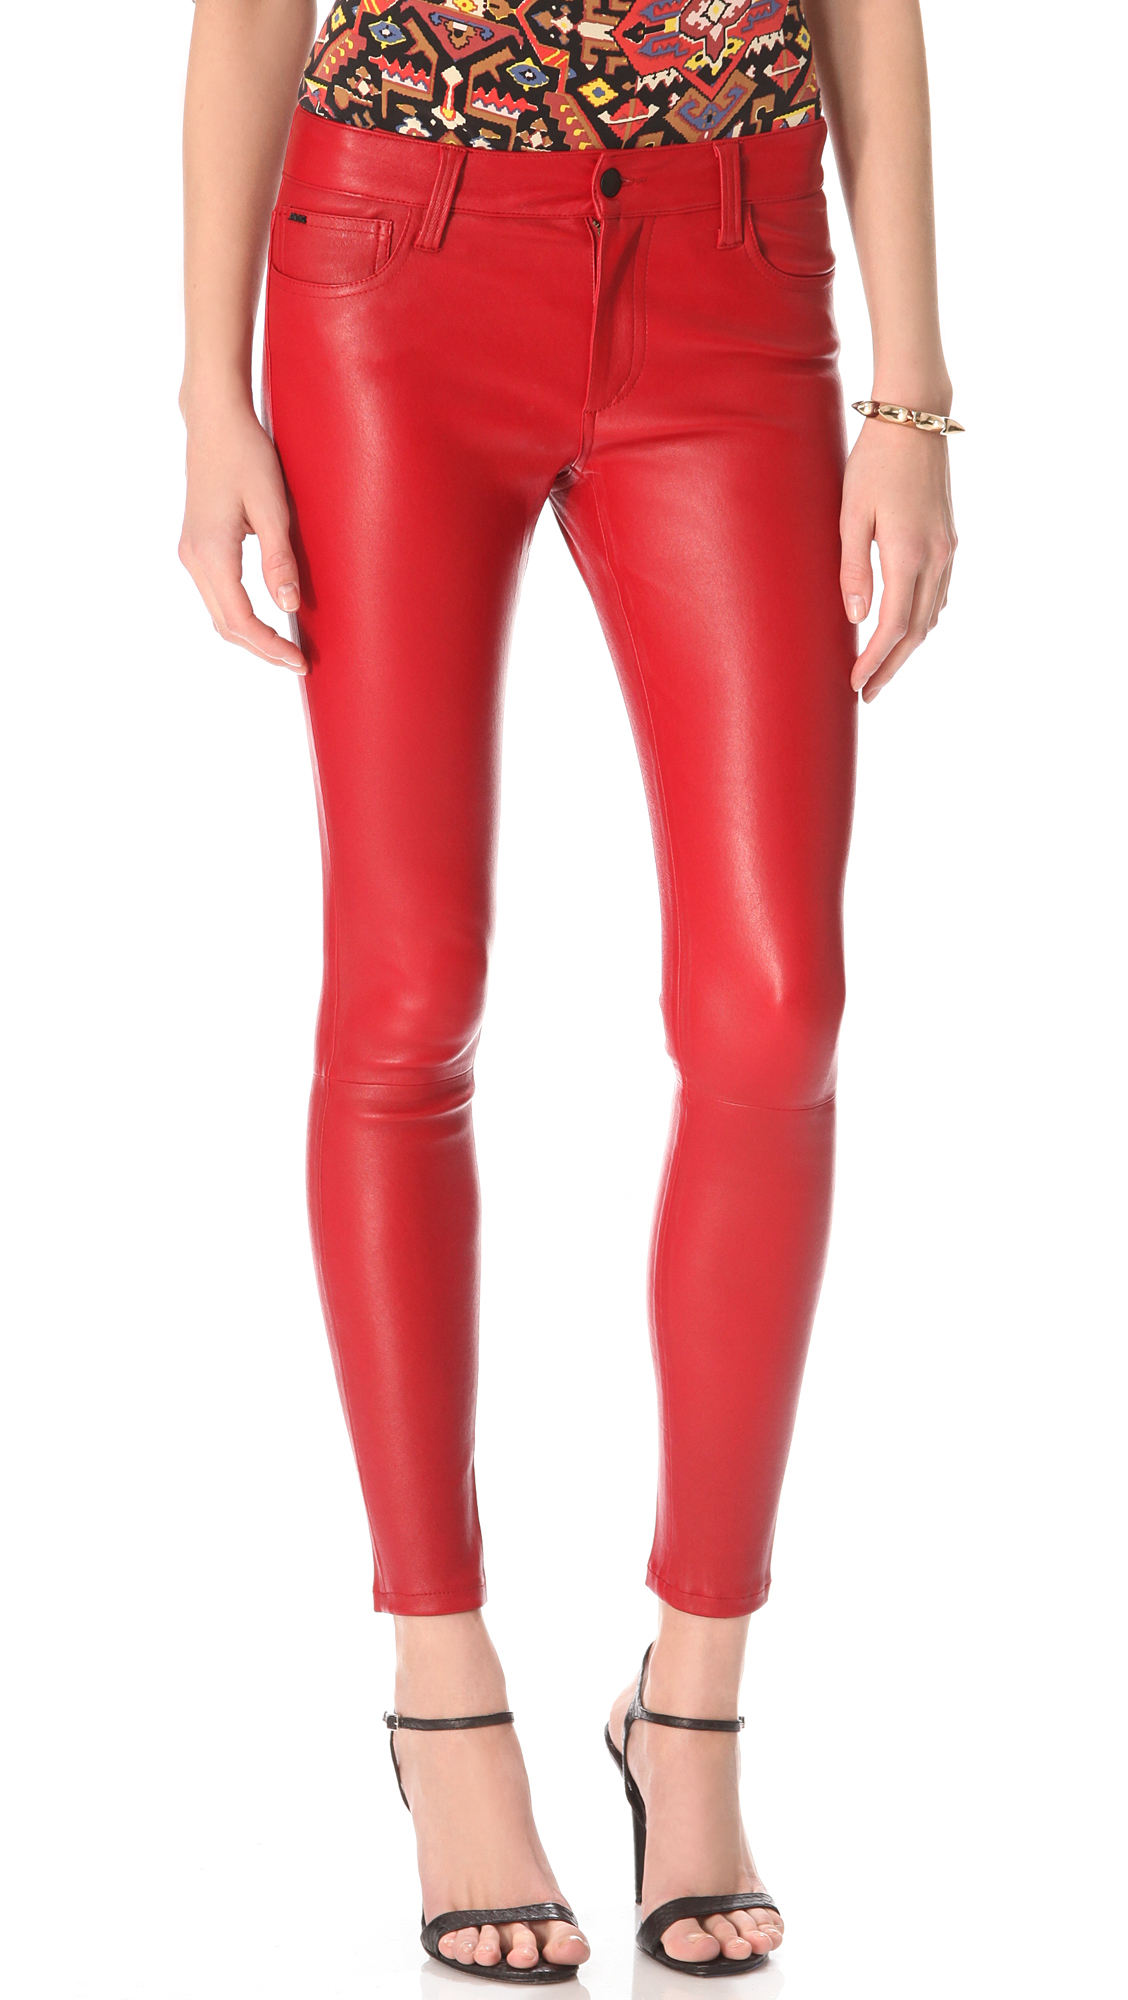  Red Leather Jeans